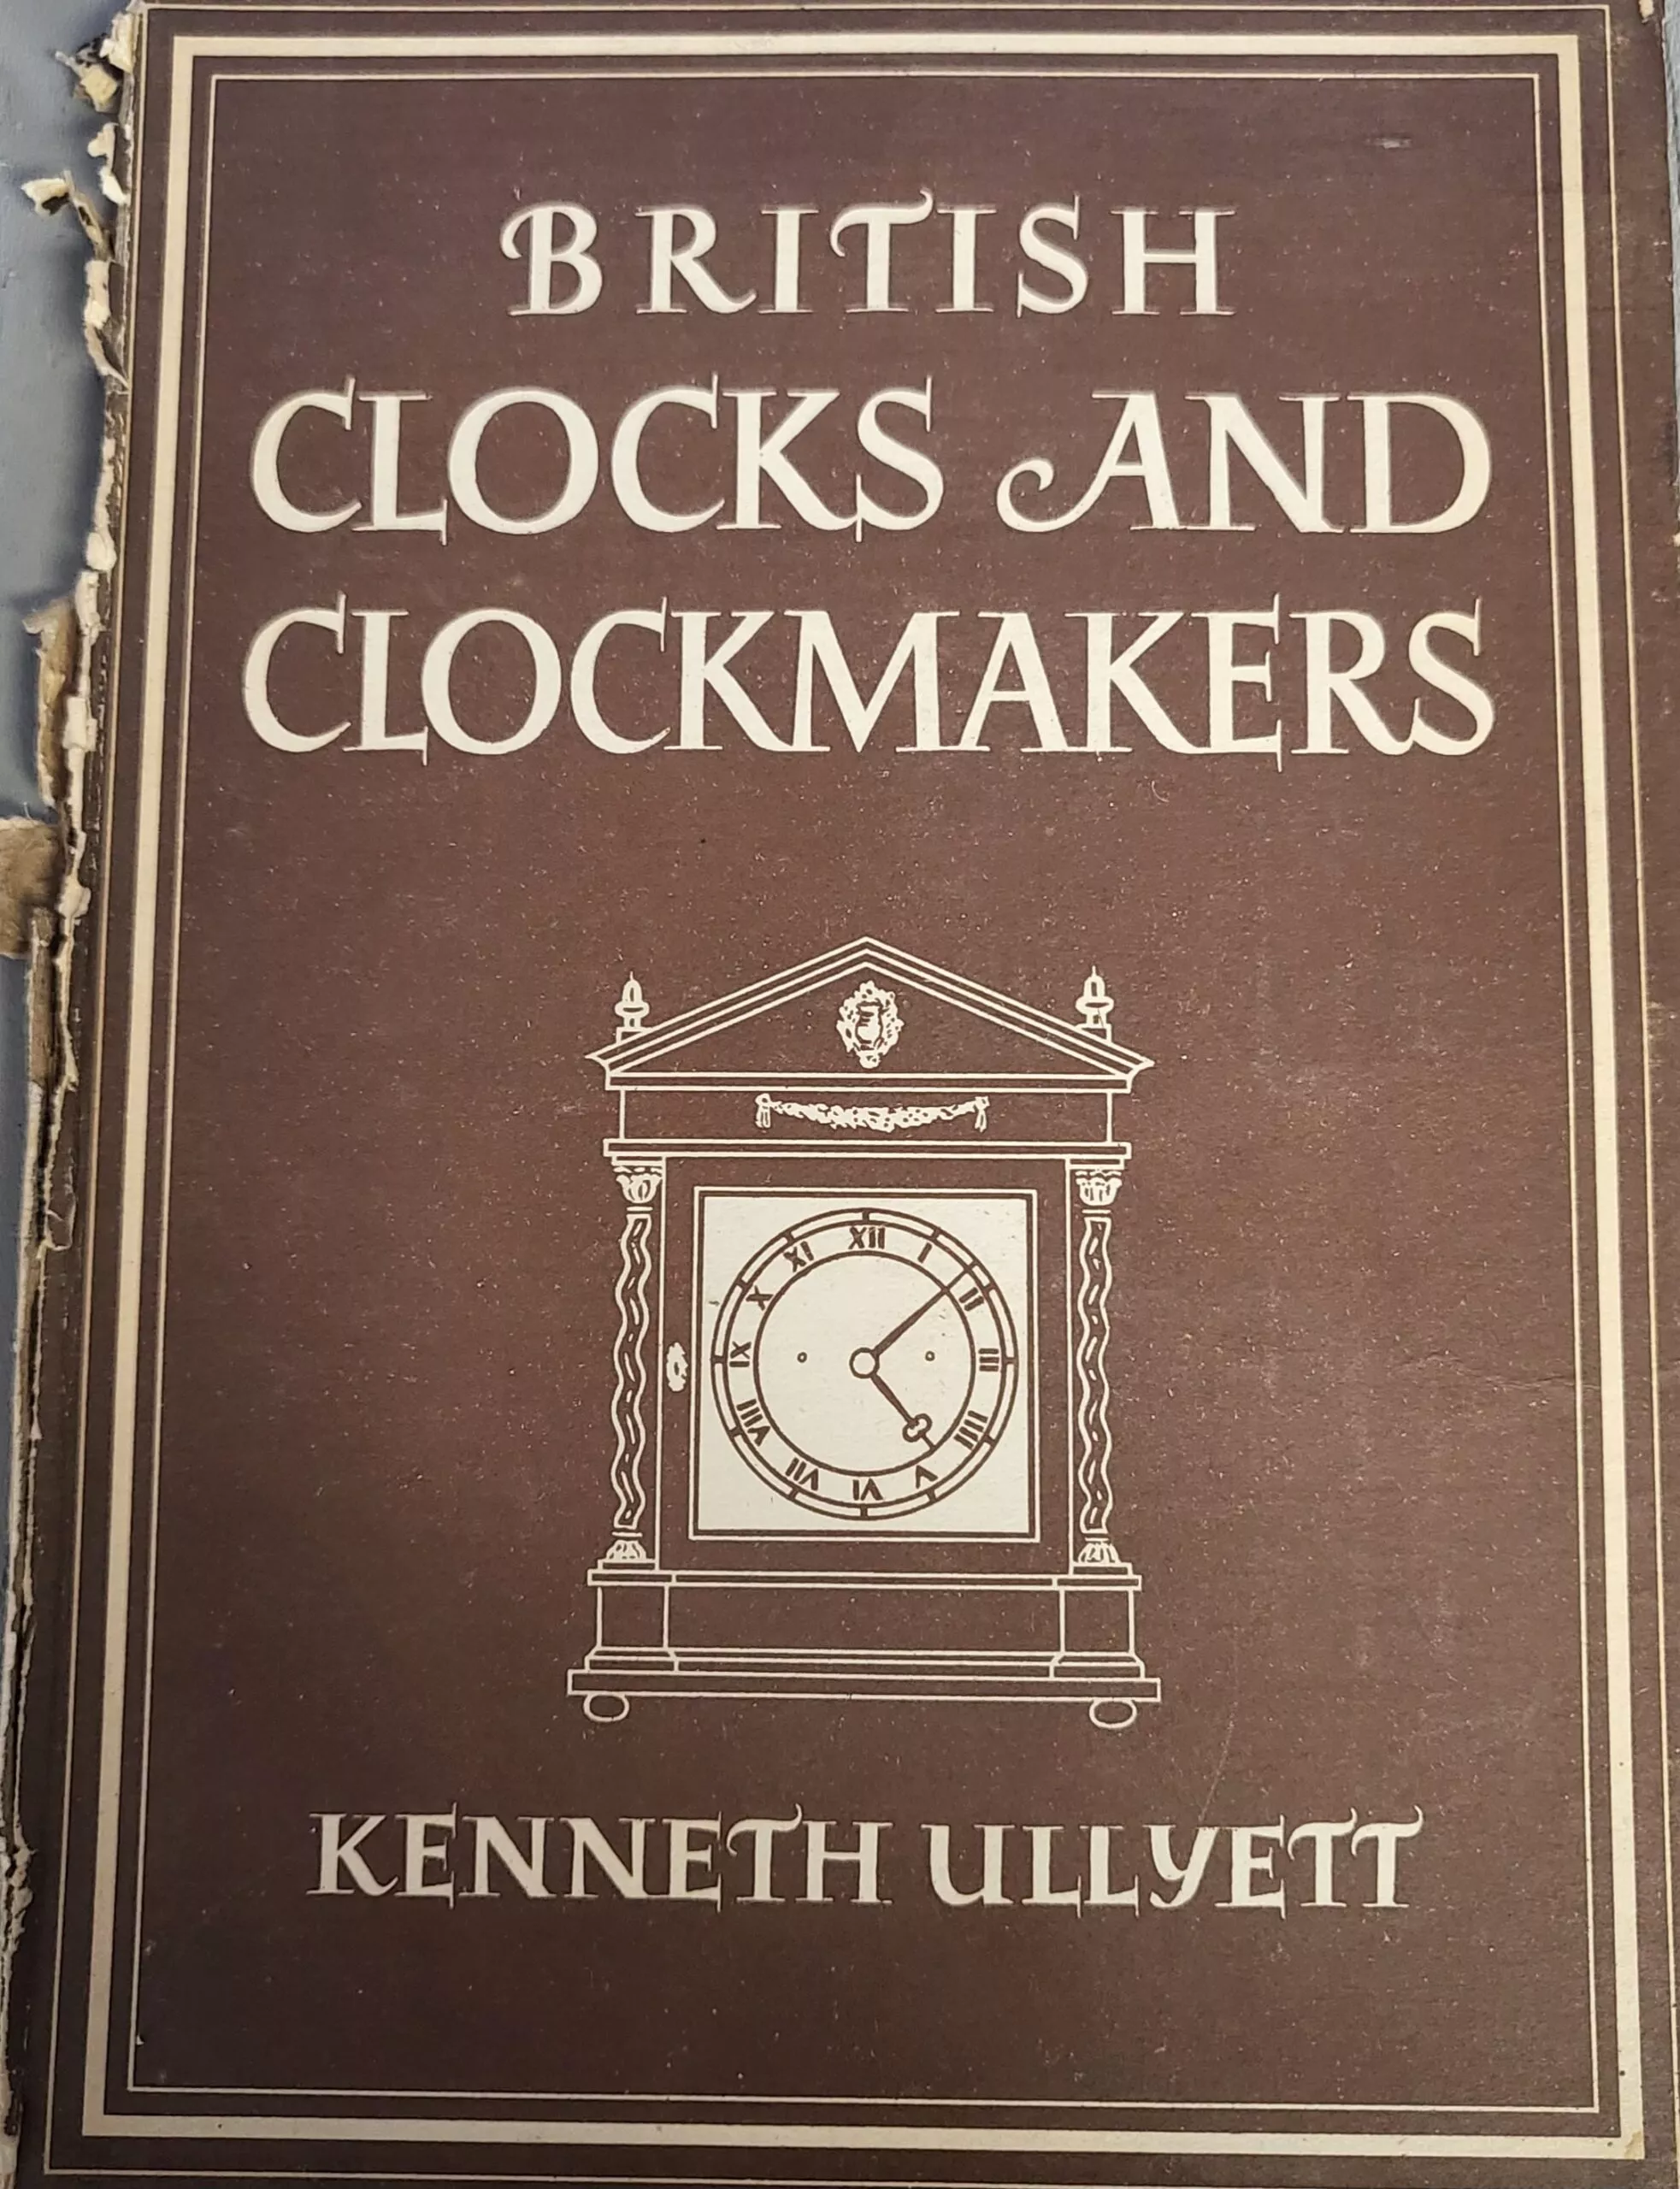 British Clocks and Clockmakers by Kenneth Ullyett - Clockworks ...